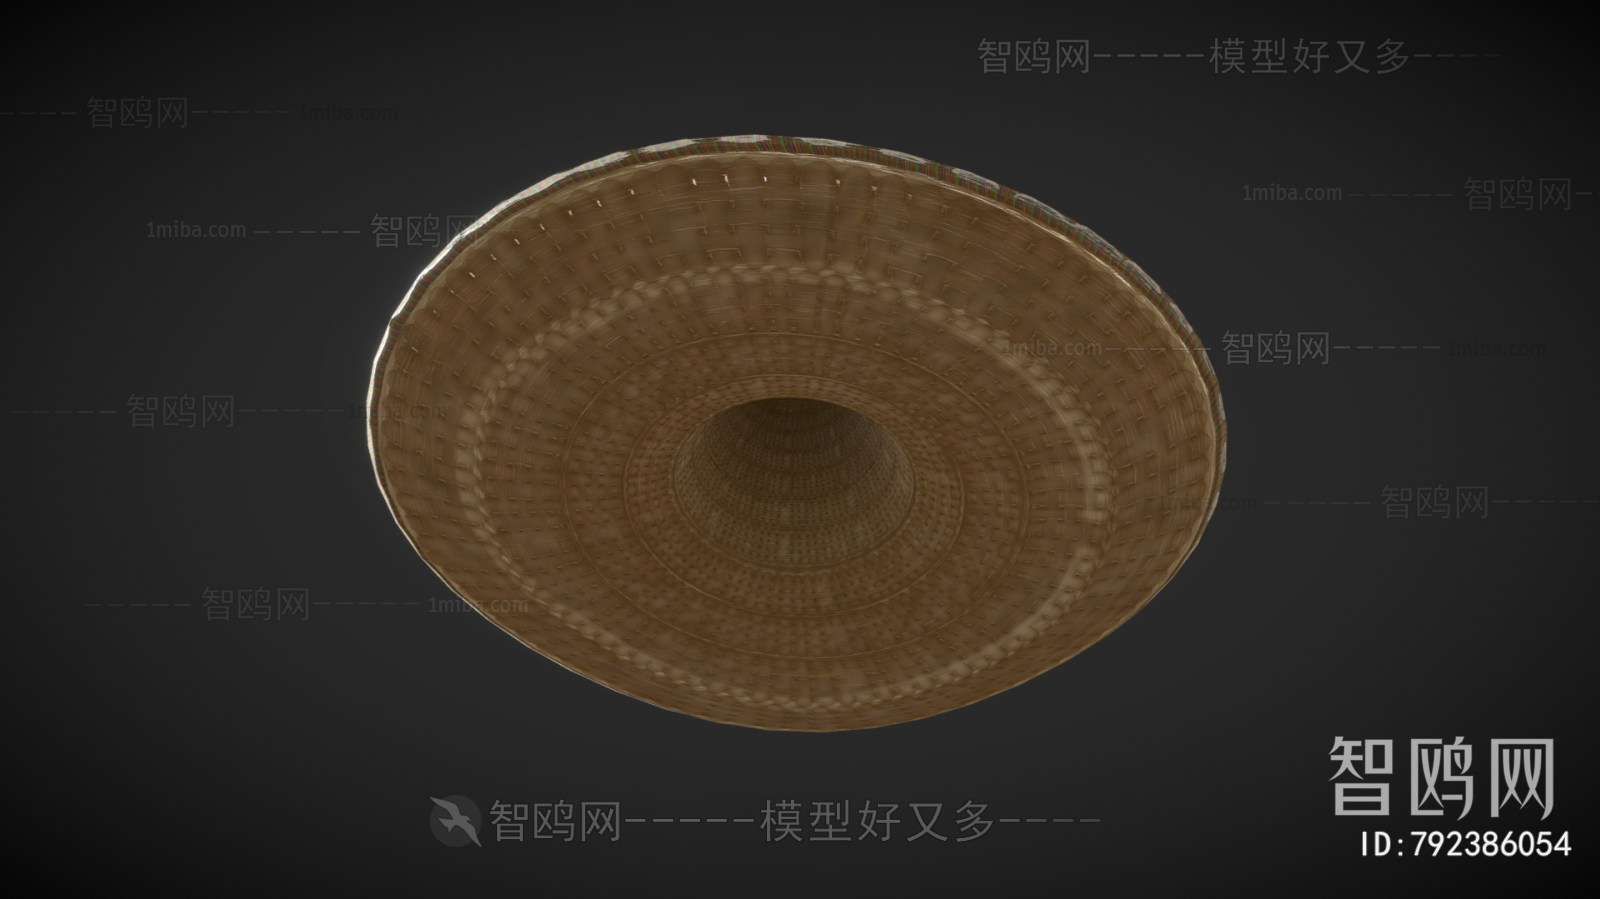 Chinese Style Hat